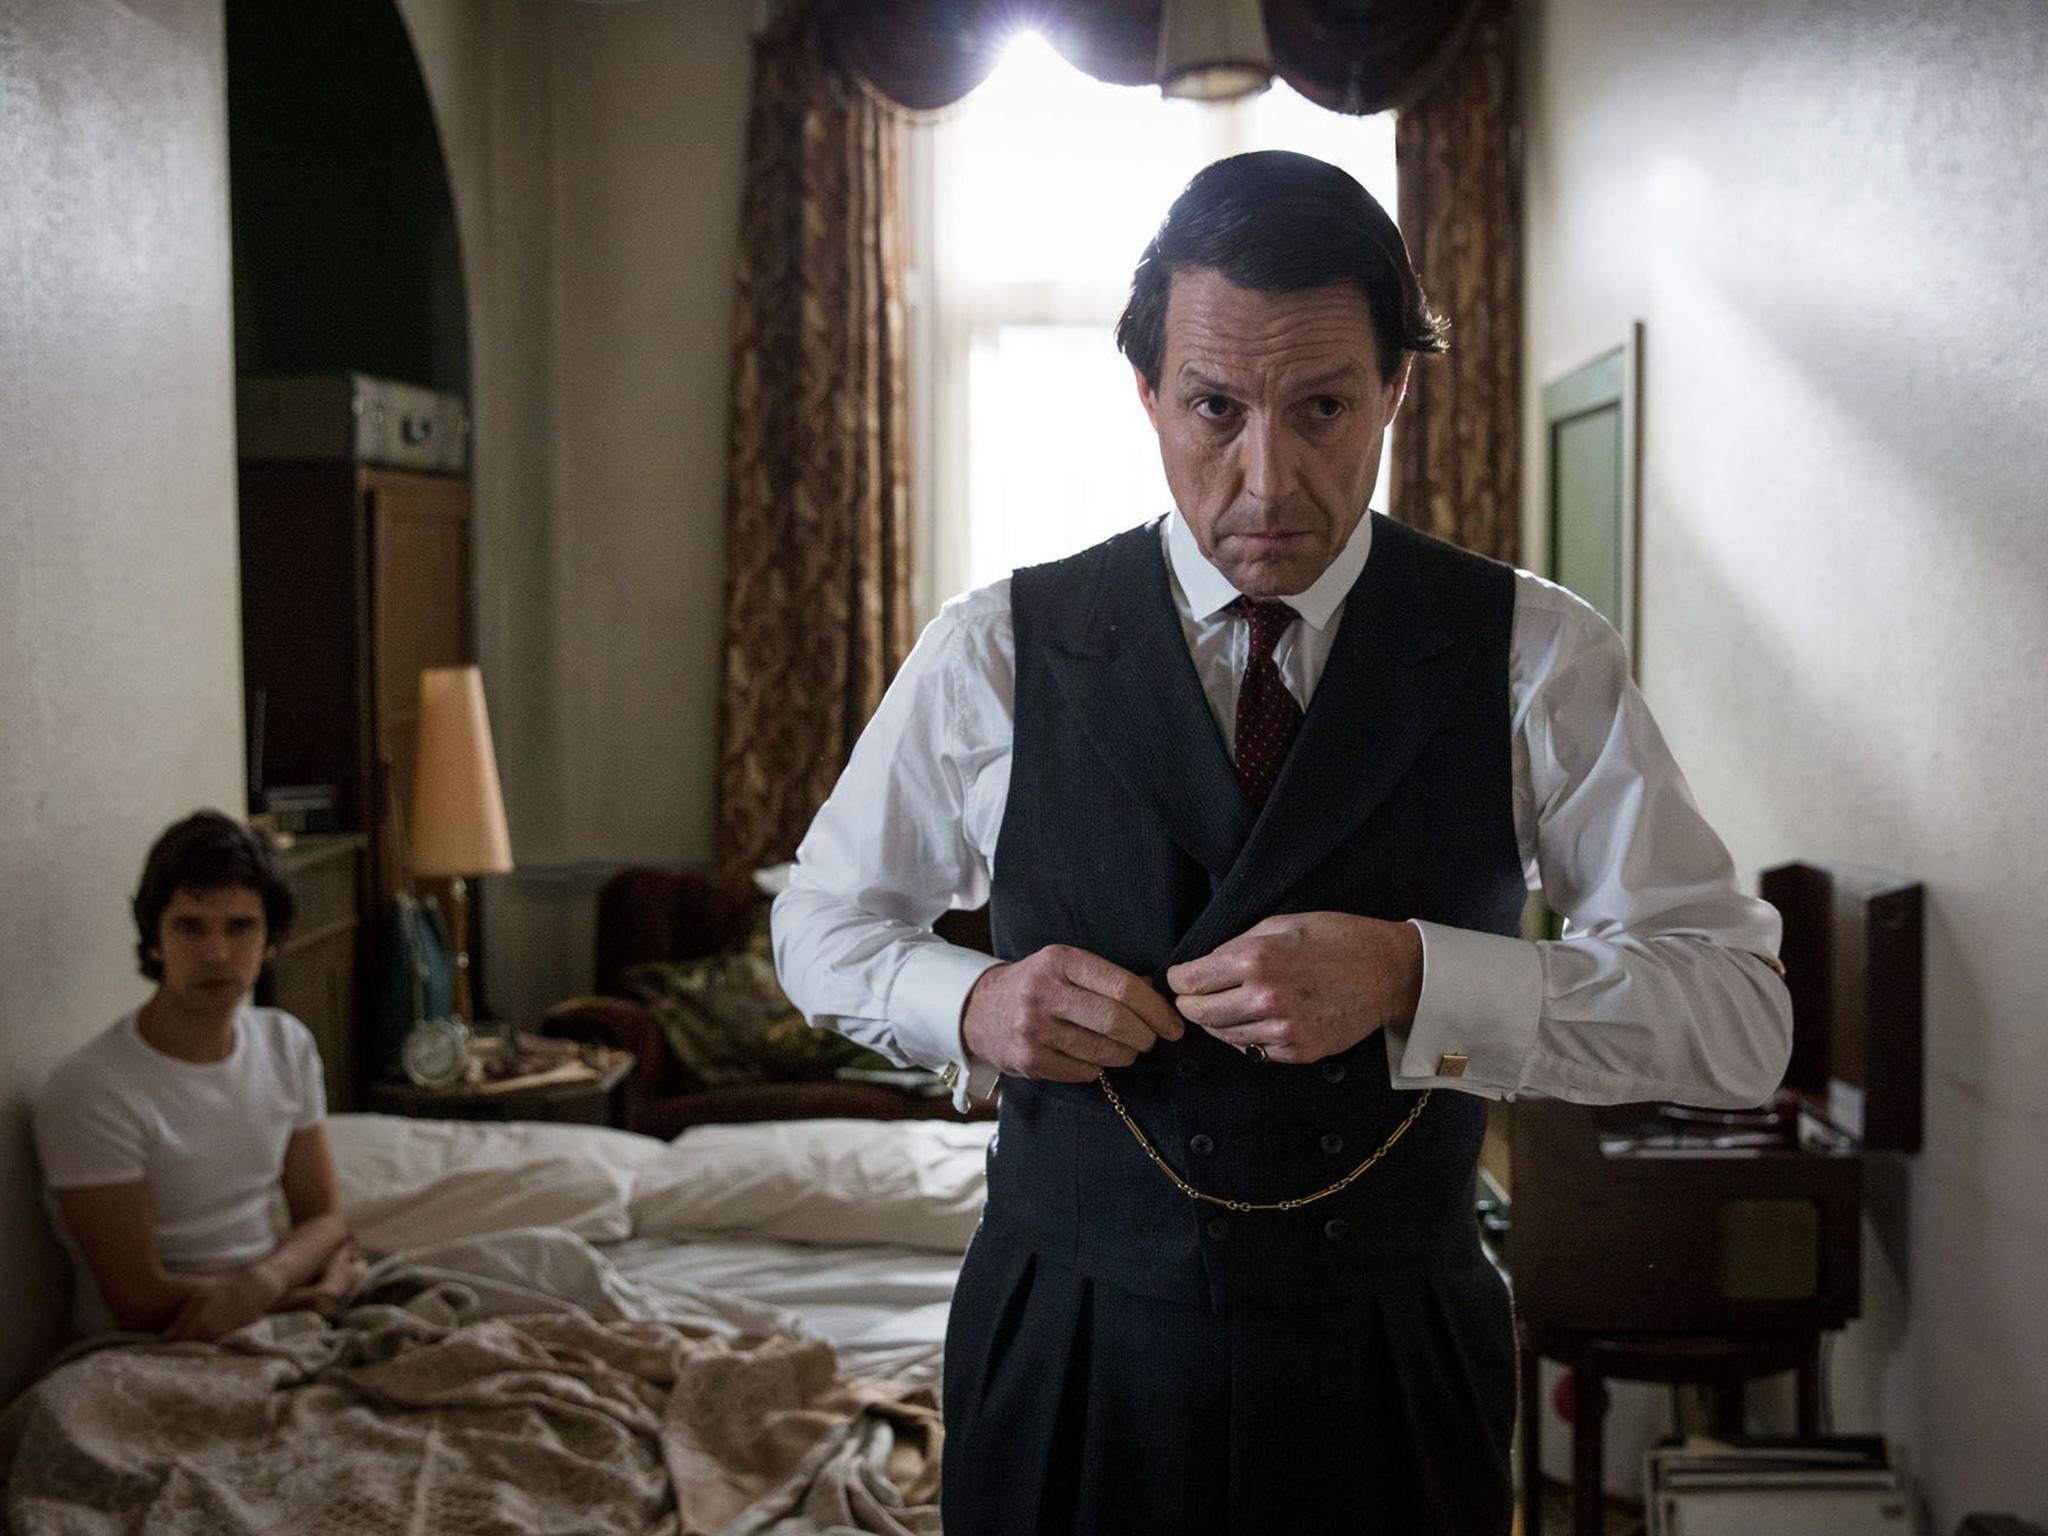 ‘A Very English Scandal’ saw first rate performances from Ben Whishaw and Hugh Grant